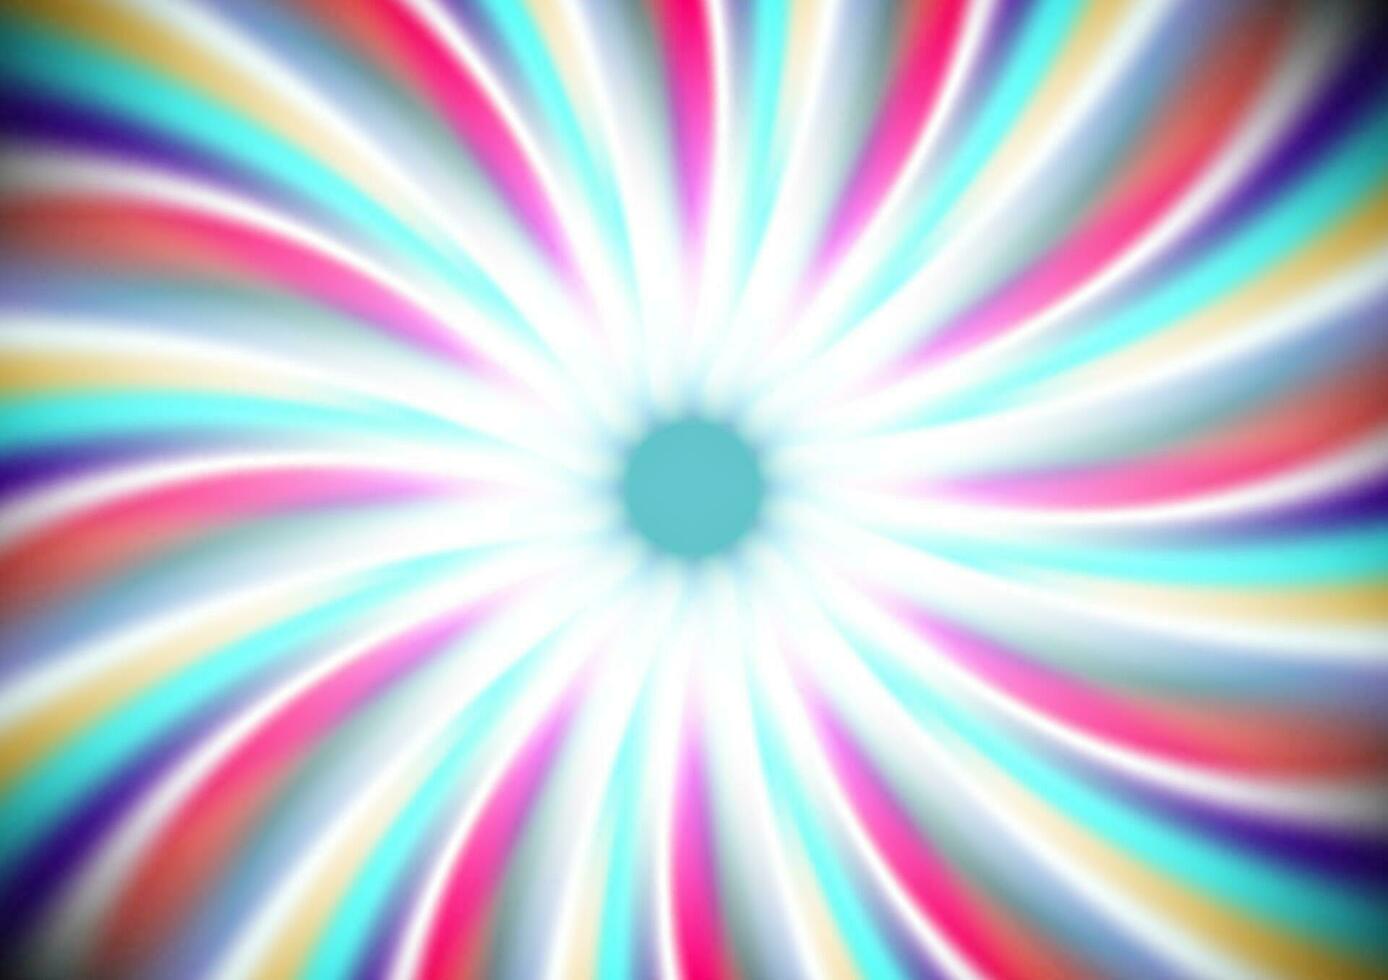 Abstract swirling radial pattern background of pink, yellow, red, blue, white and green stripes. Helix sunburst vector background